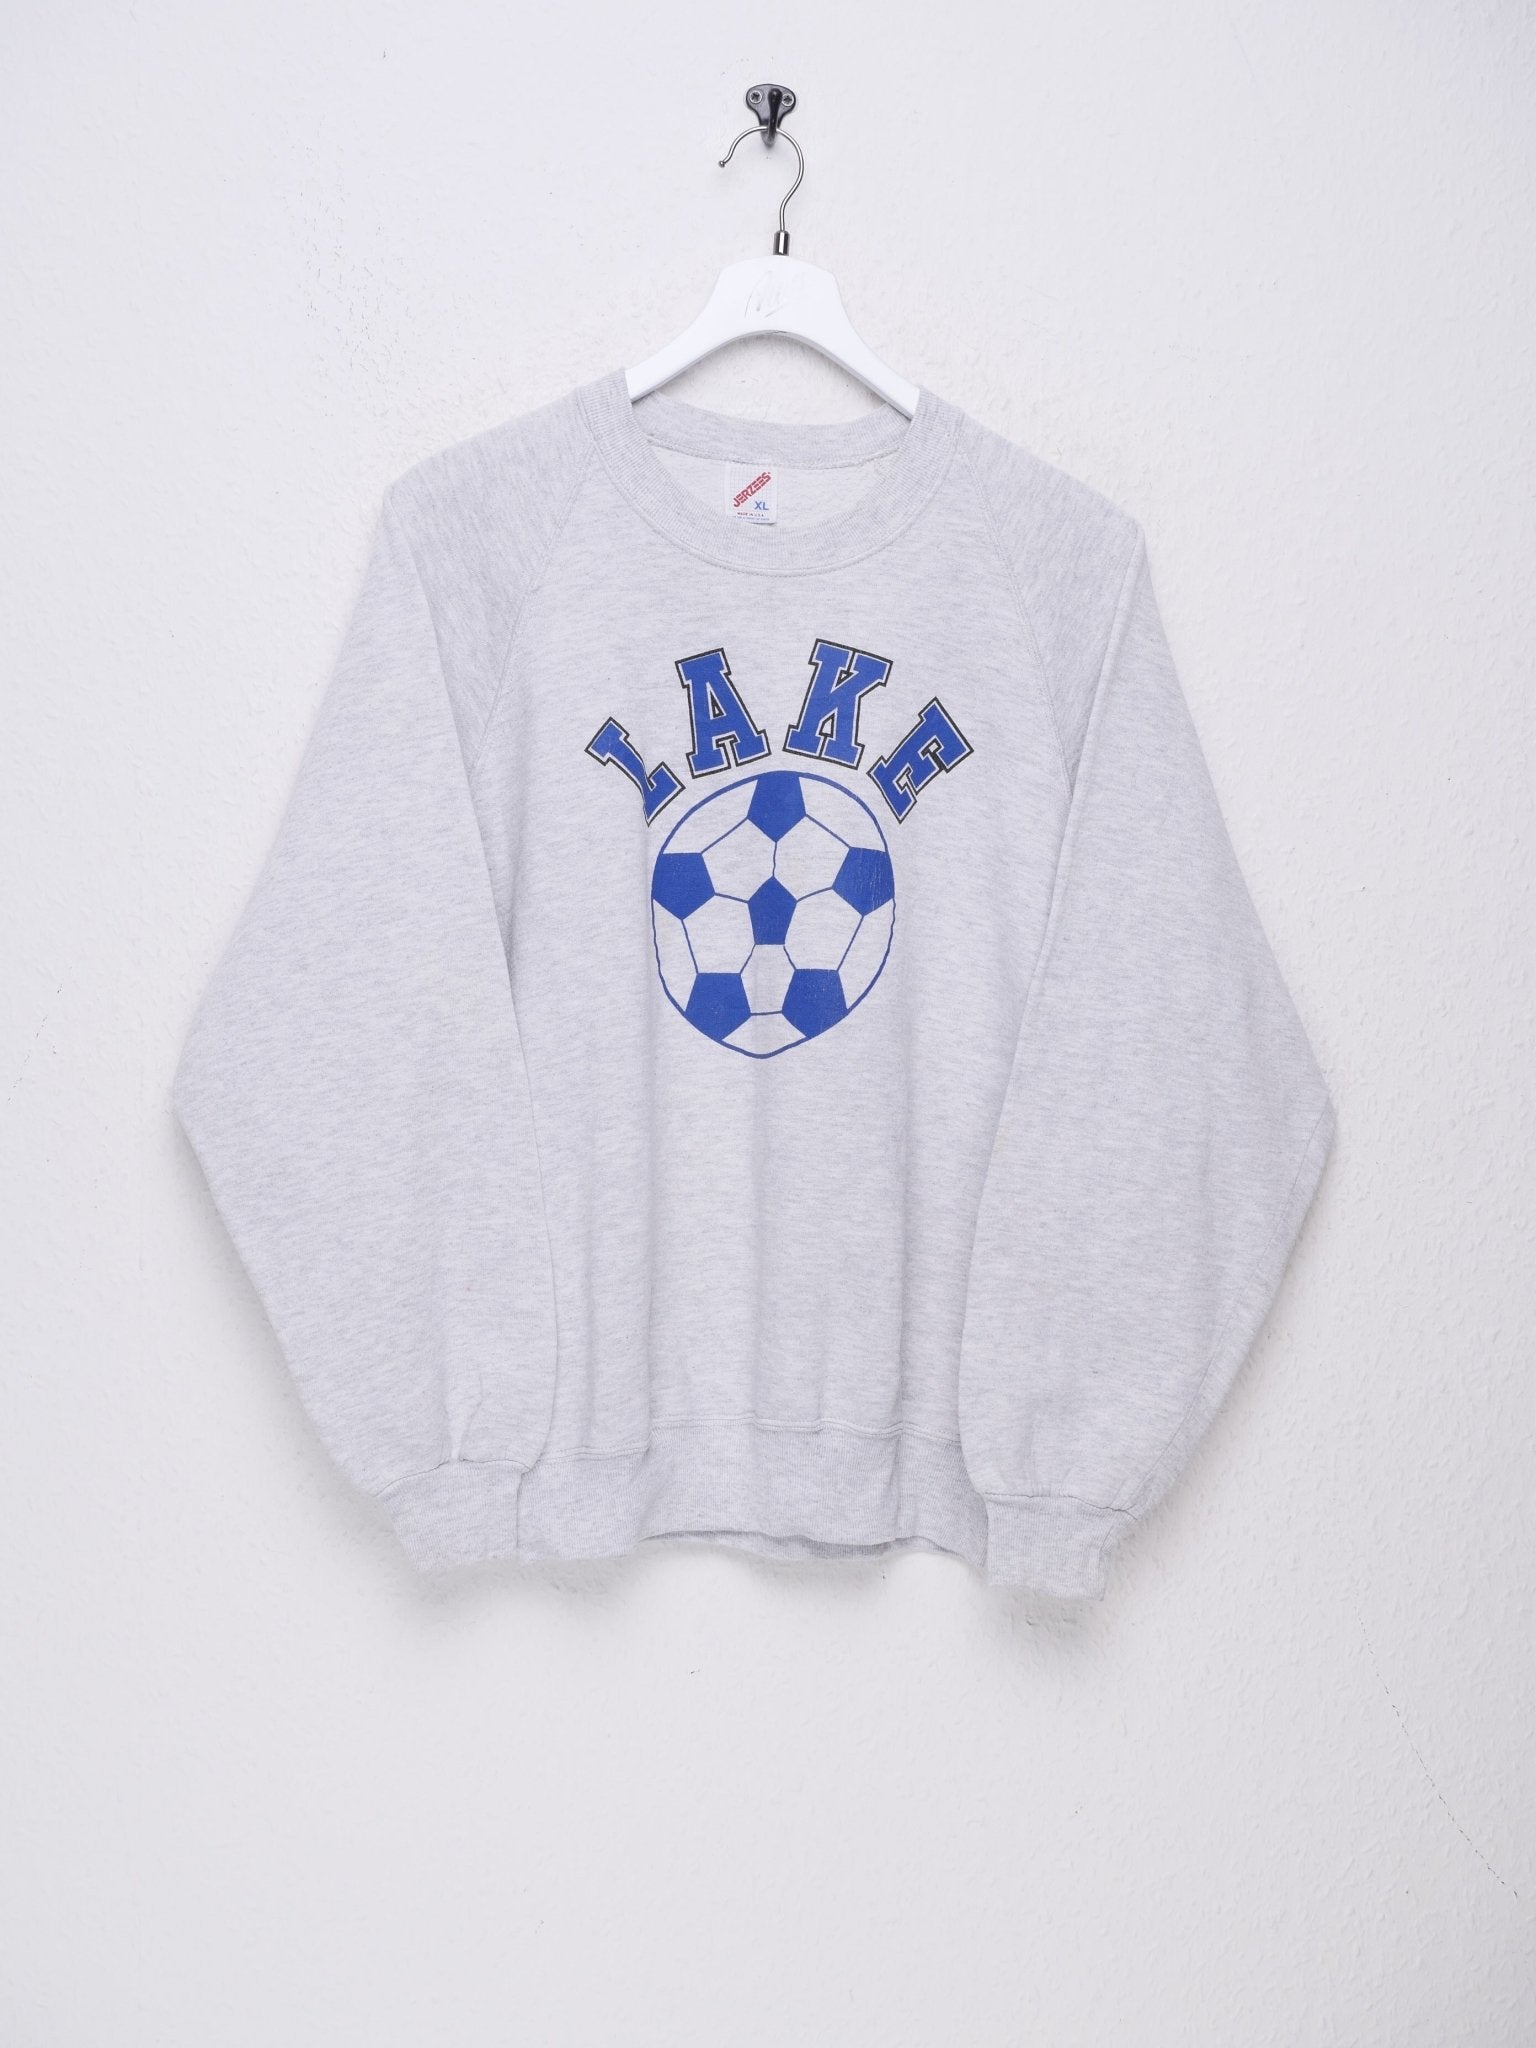 Soccer 'Lake' printed Graphic grey Sweater - Peeces